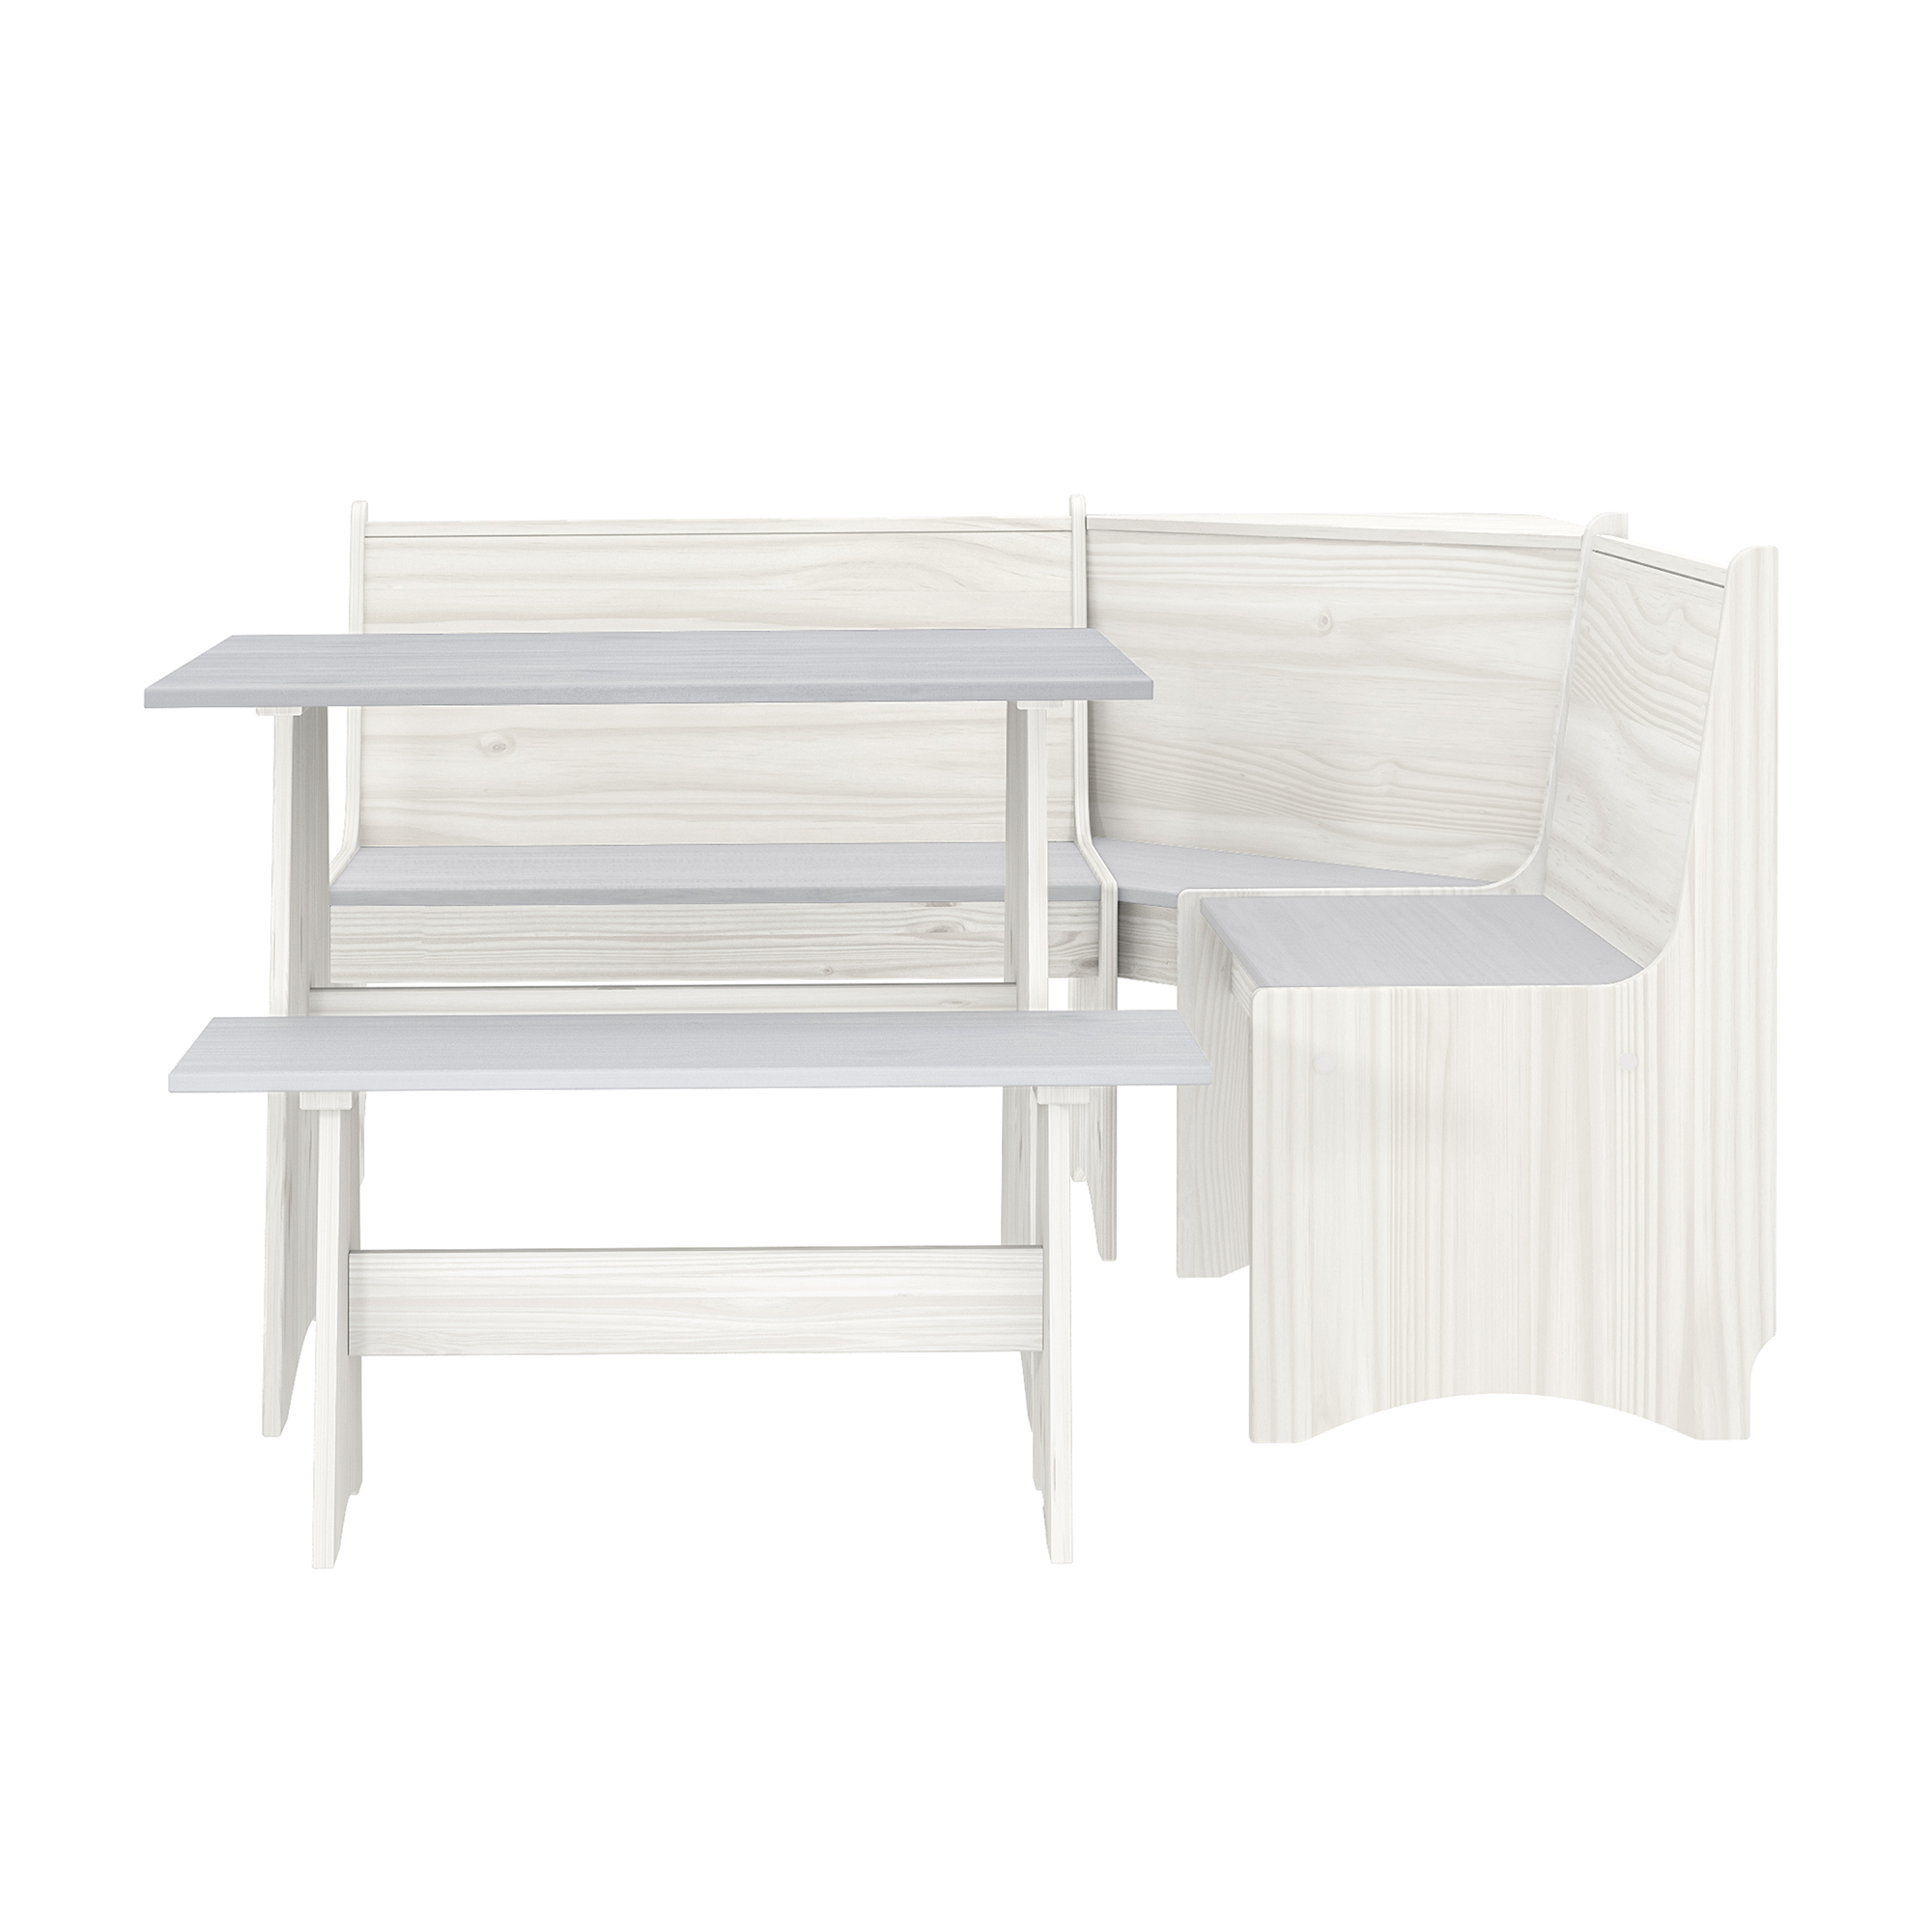 Woven Paths Cottonwood 3-Piece Small Spaces Wood Dining Nook, White/Gray - image 5 of 9